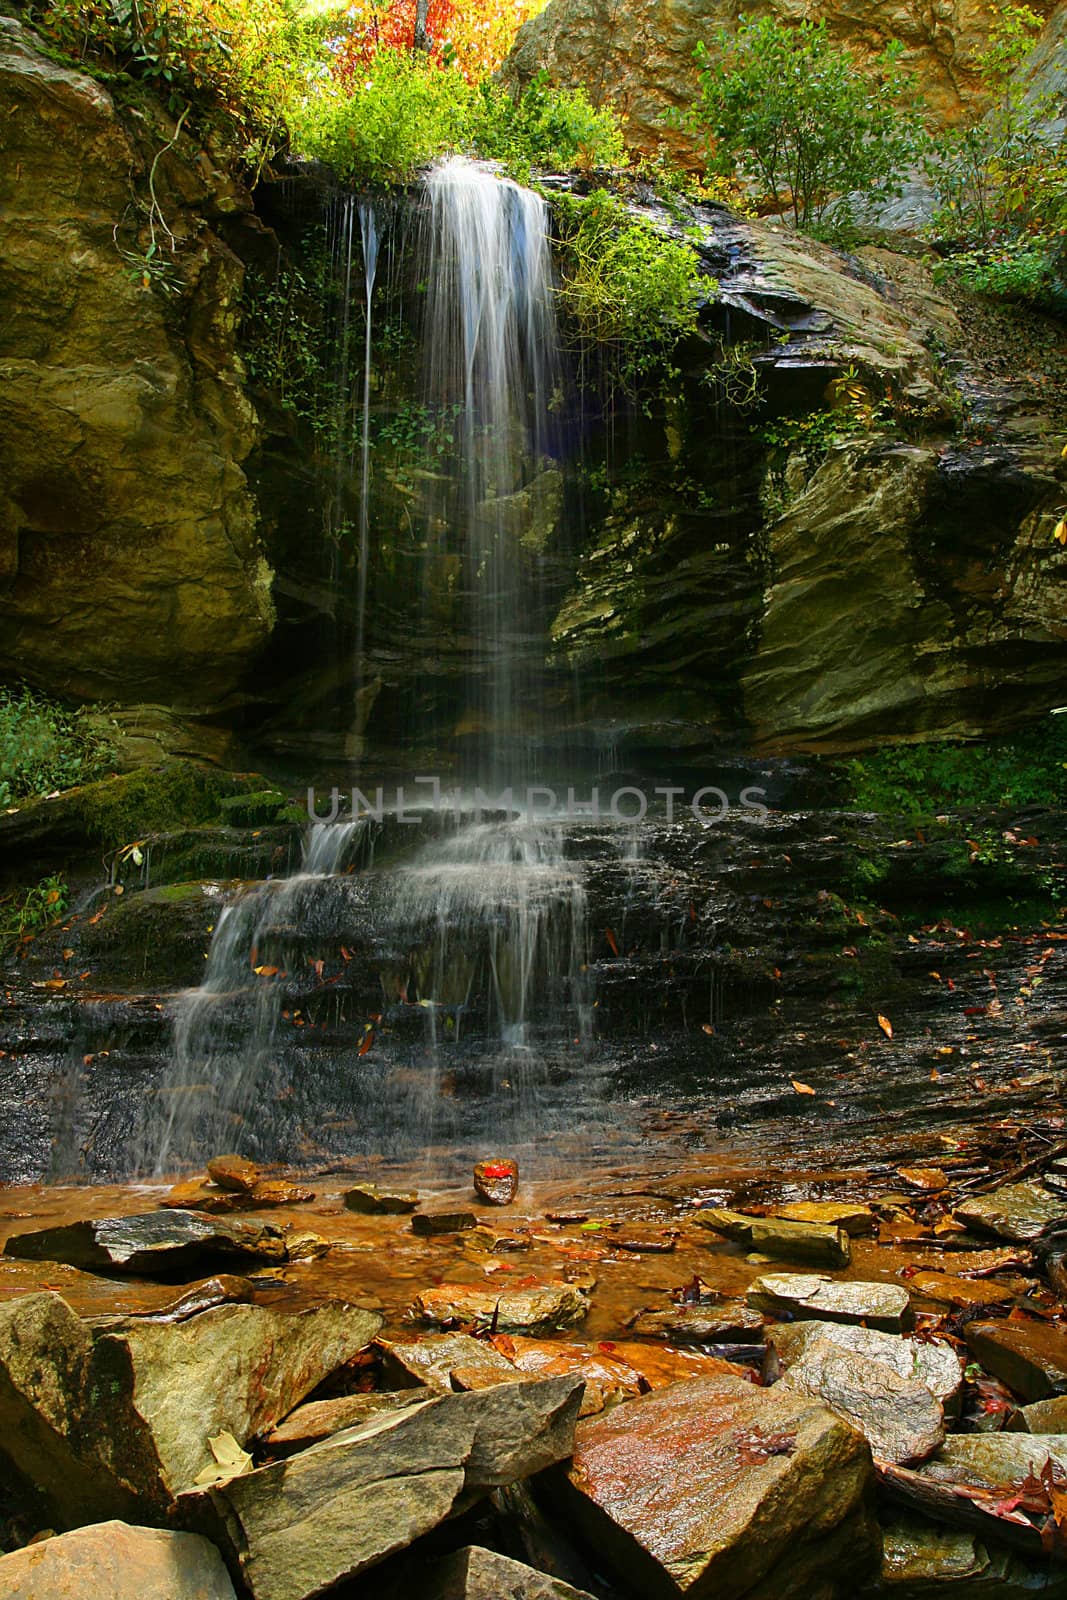 Water fall during fall of the year

